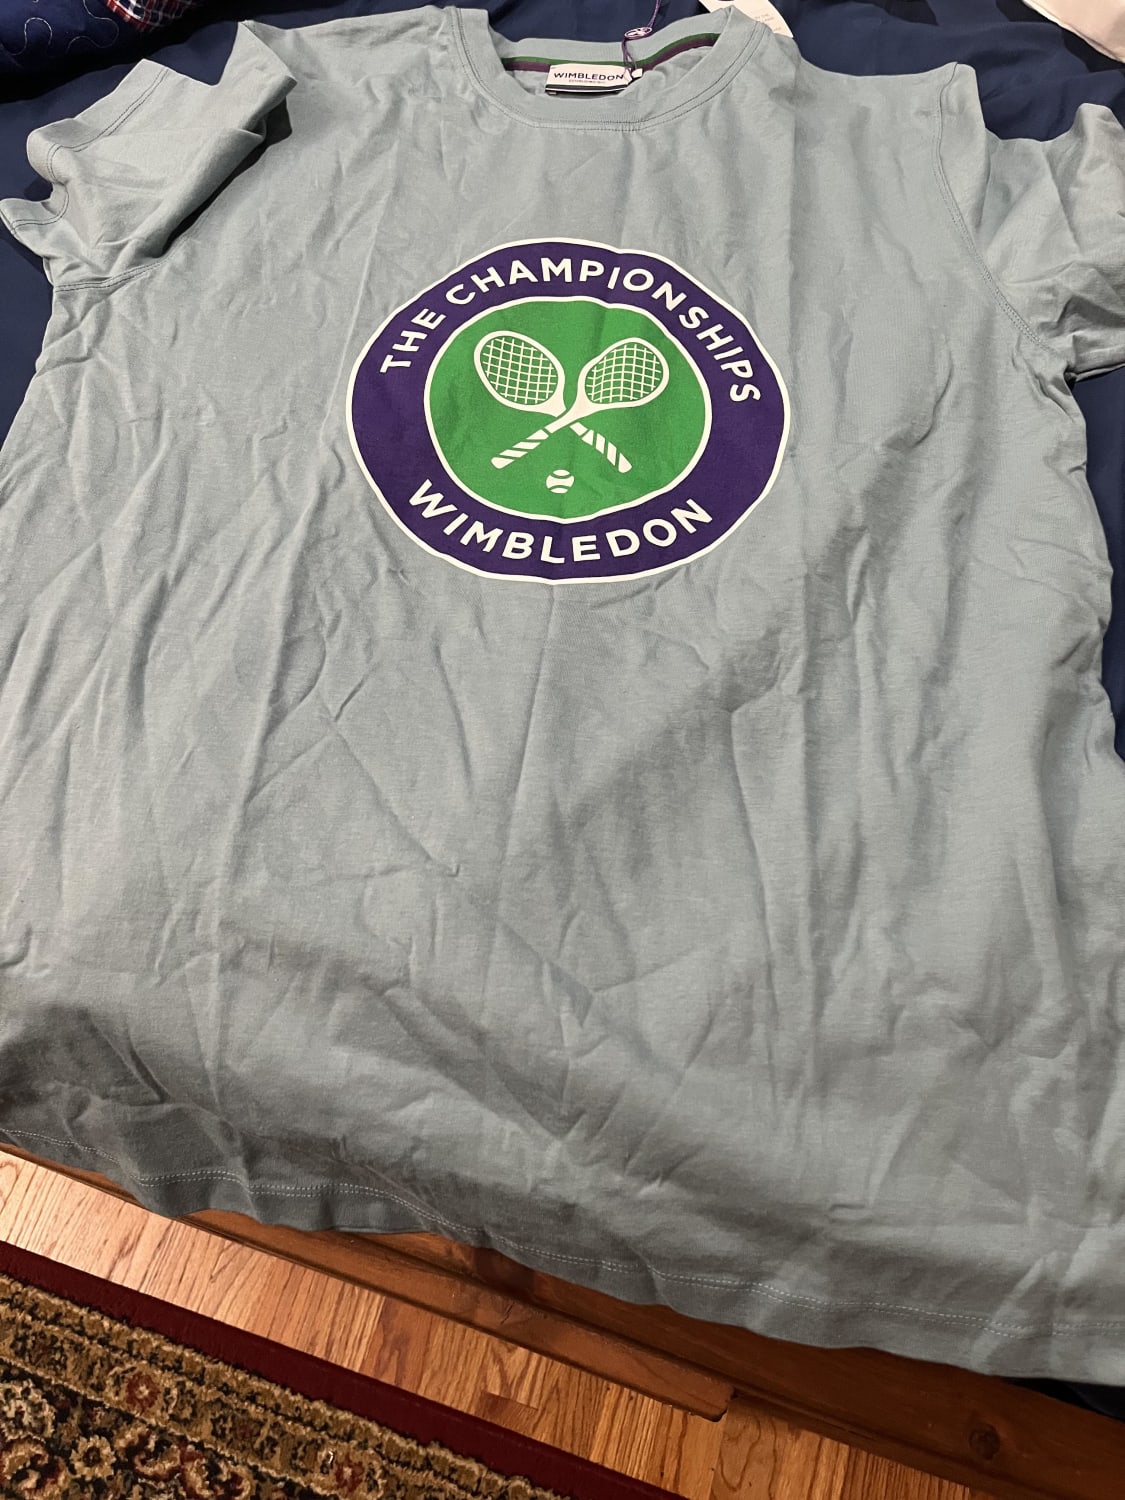 My parents recently went to London and took a tour of the Wimbledon stadium. They got me this shirt. Really hope to go to Wimbledon one day.